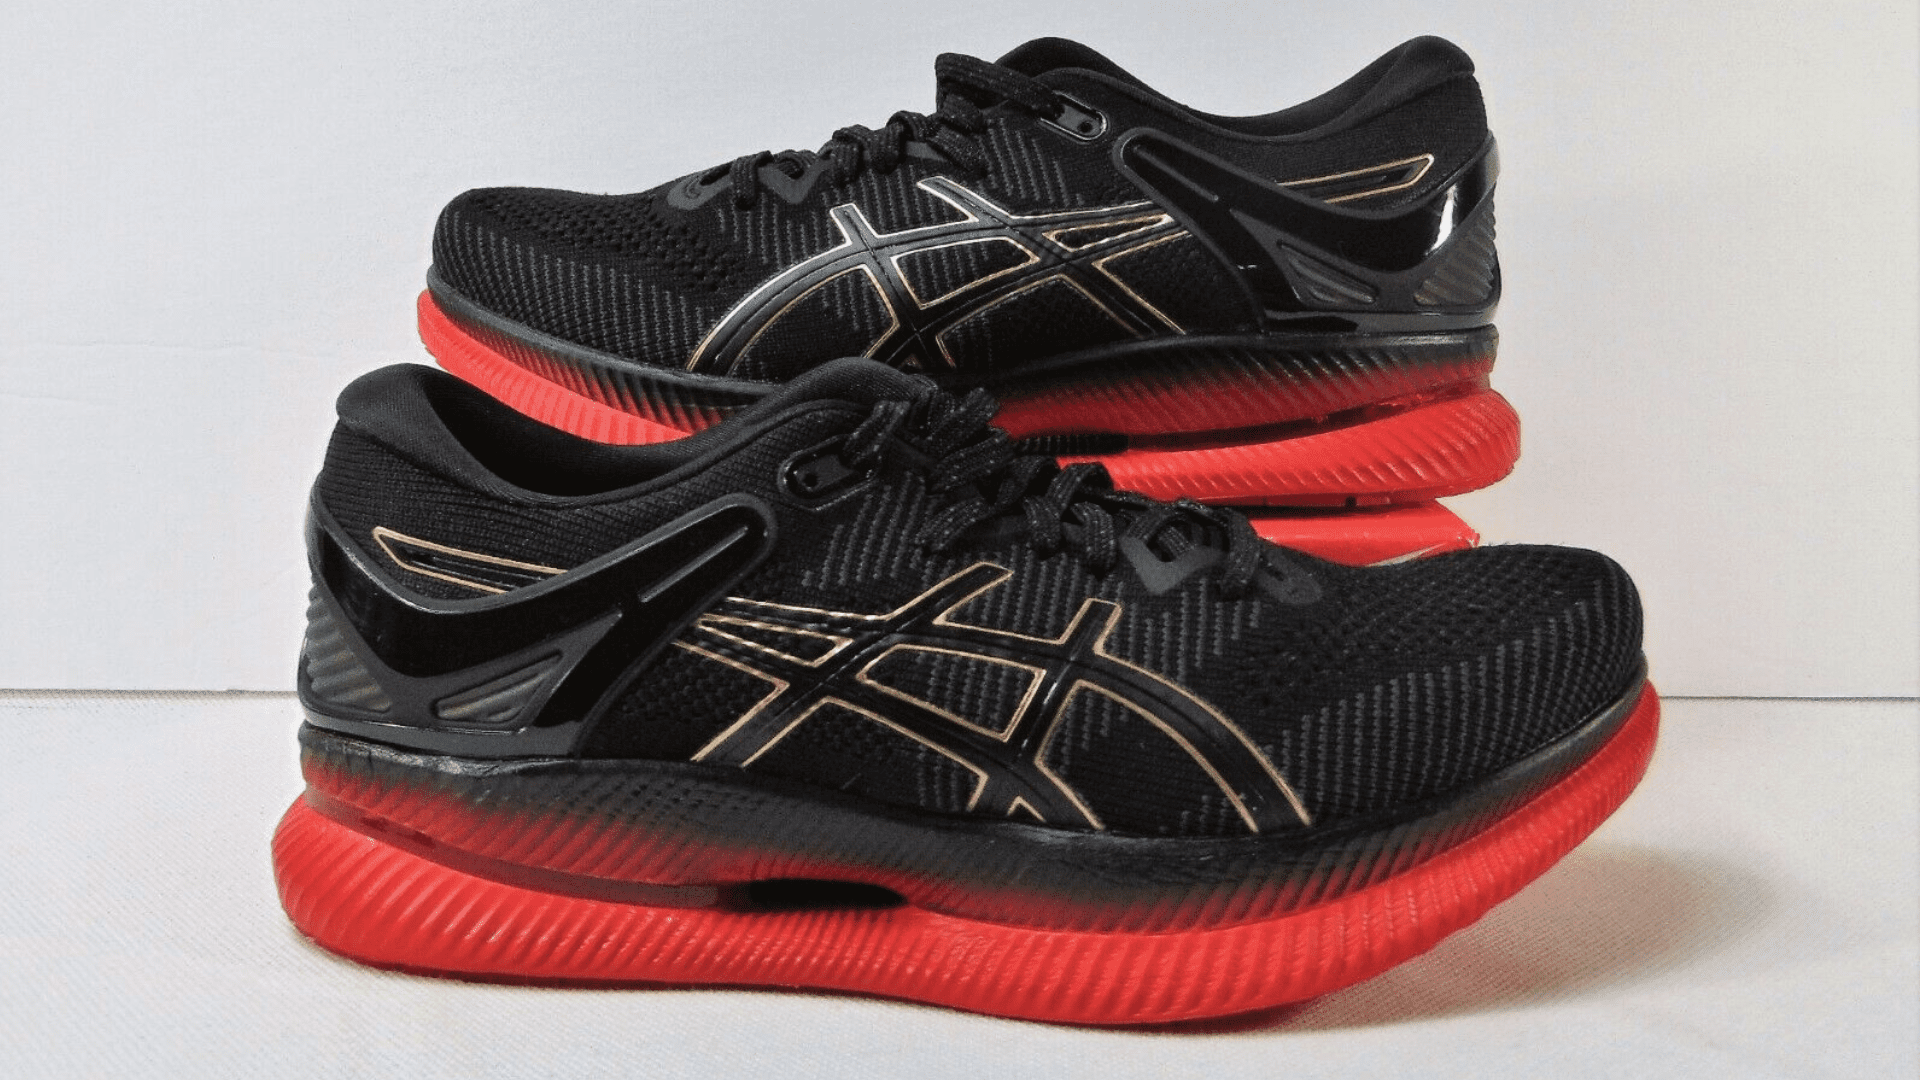 A pair of Asics Metaride shoes, highlighting the rocker sole and ample room for toes that make them suitable for relieving pain associated with hammer toes.